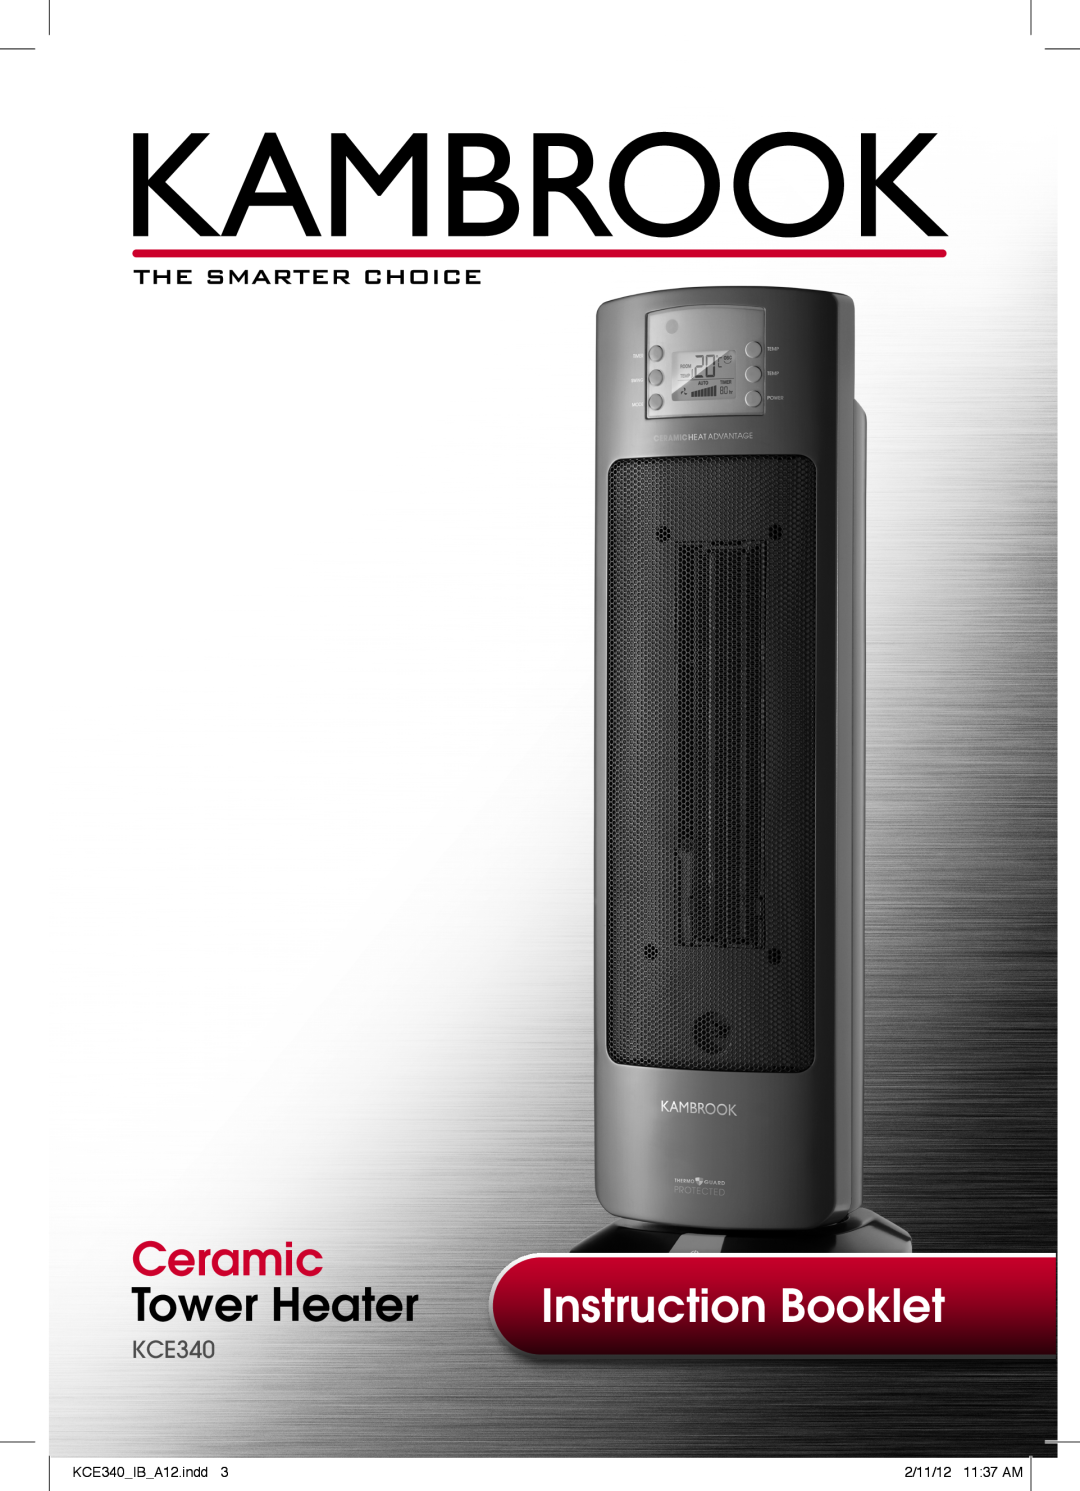 Kambrook manual Ceramic, Tower Heater, Instruction Booklet, KCE340 IB A12.indd, 2/11/12 11 37 AM 